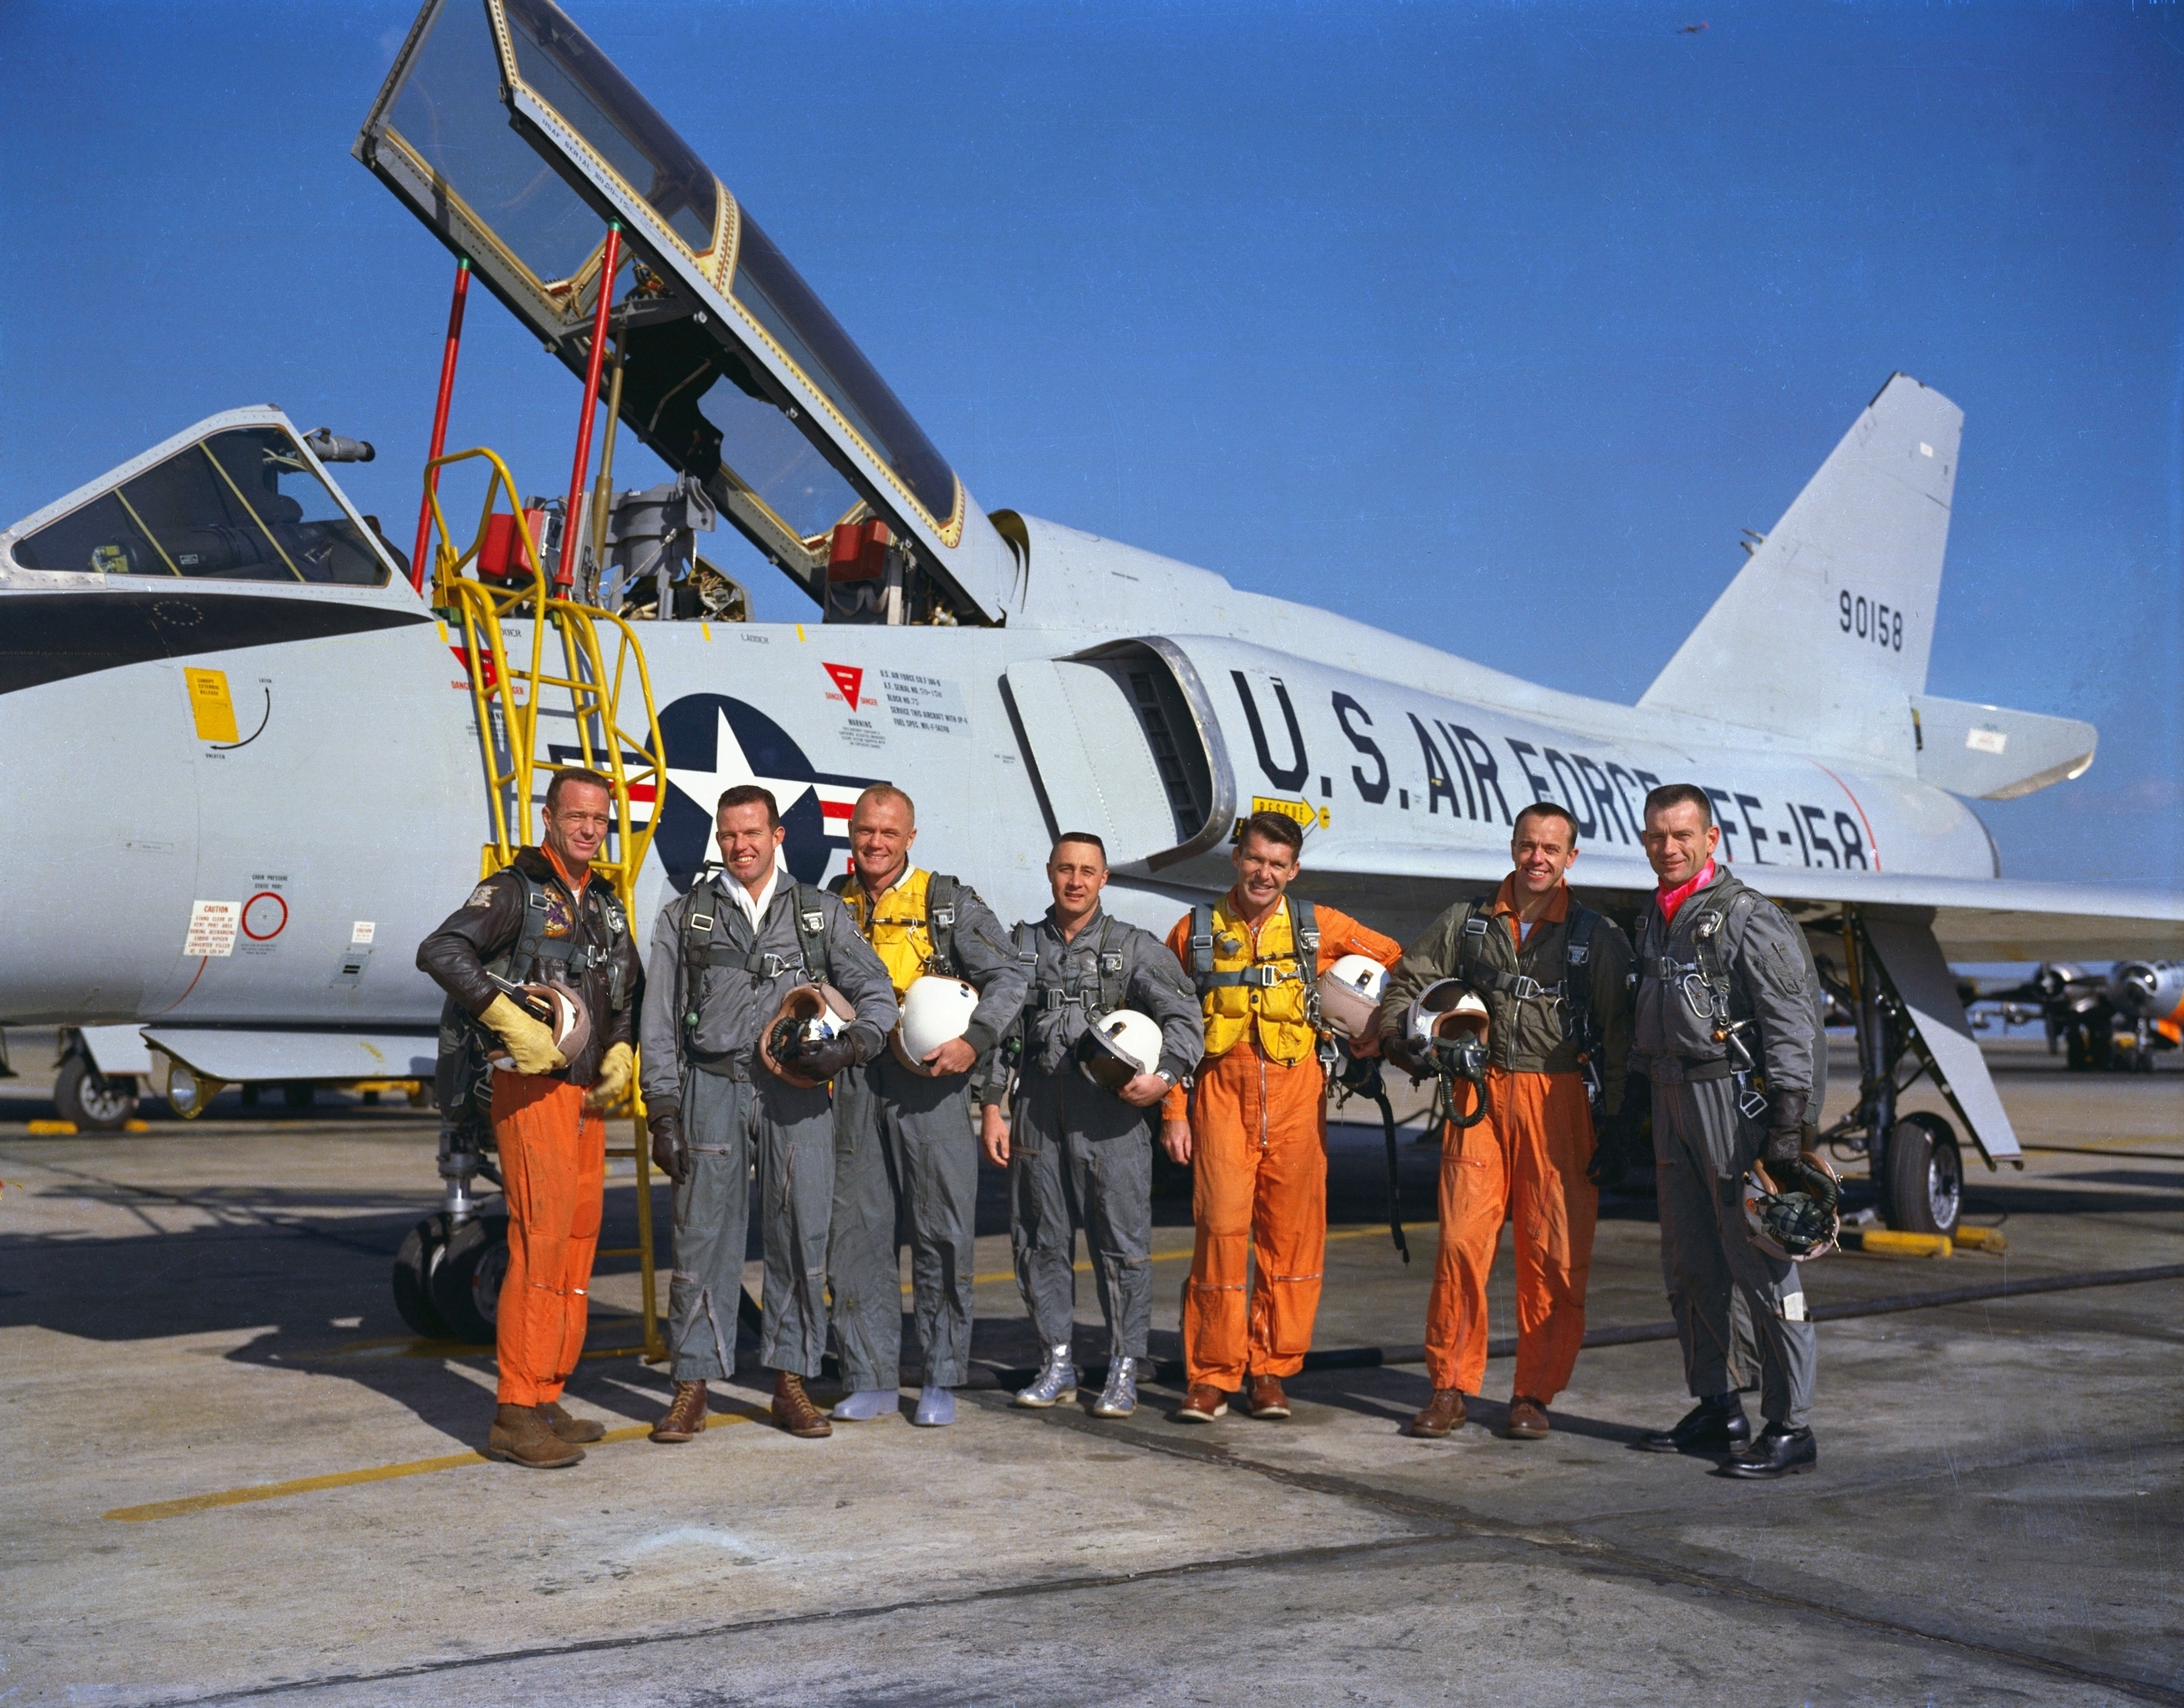 The Mercury Seven in front of an F-106 Delta Dart, used in aviation movies.